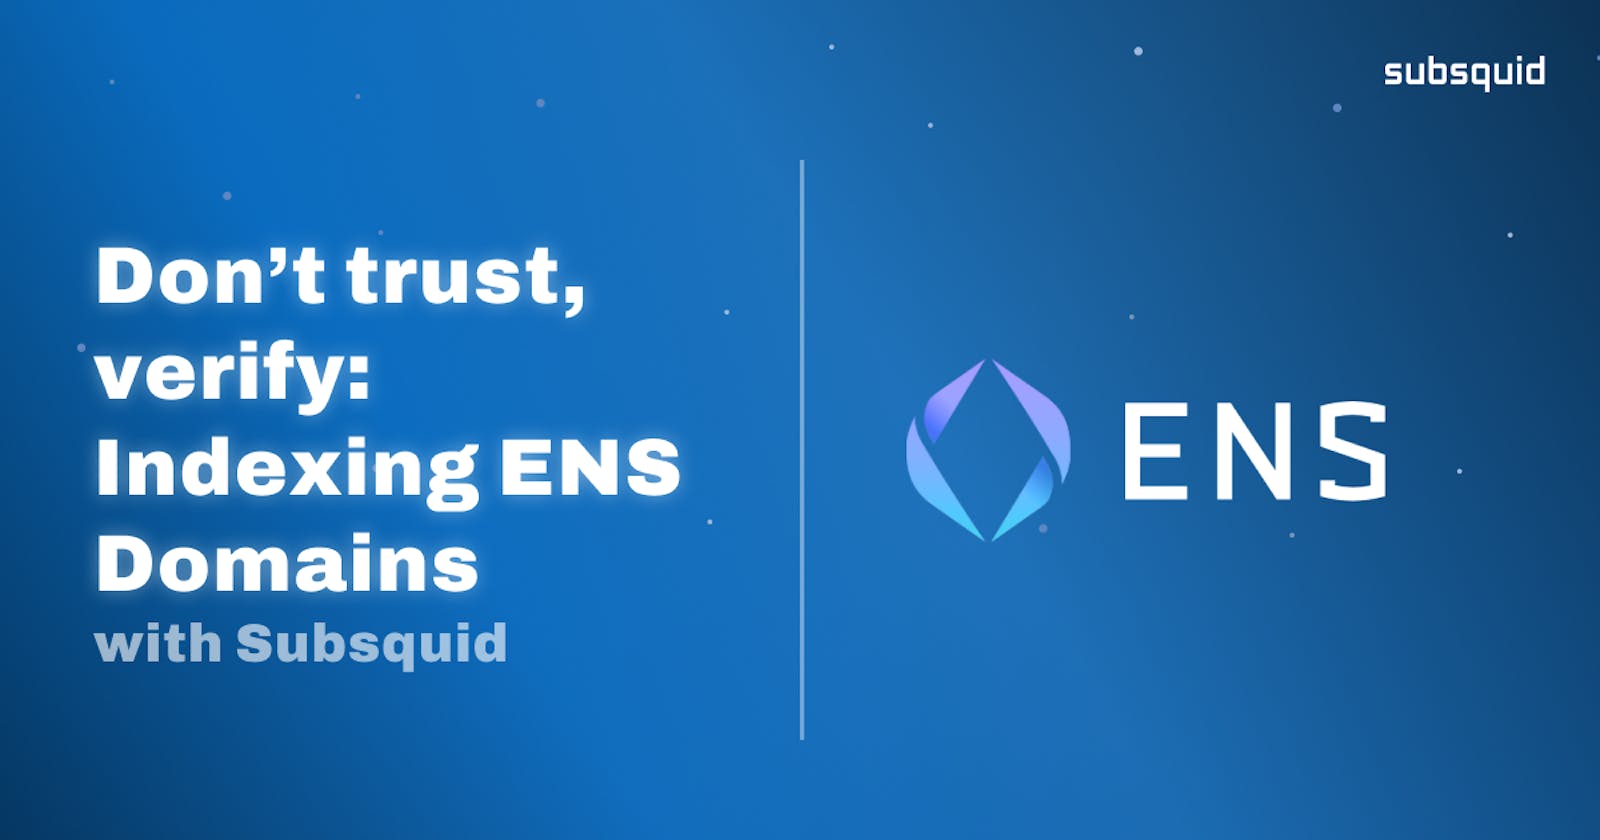 Don't trust, verify: Indexing ENS Domains with Subsquid